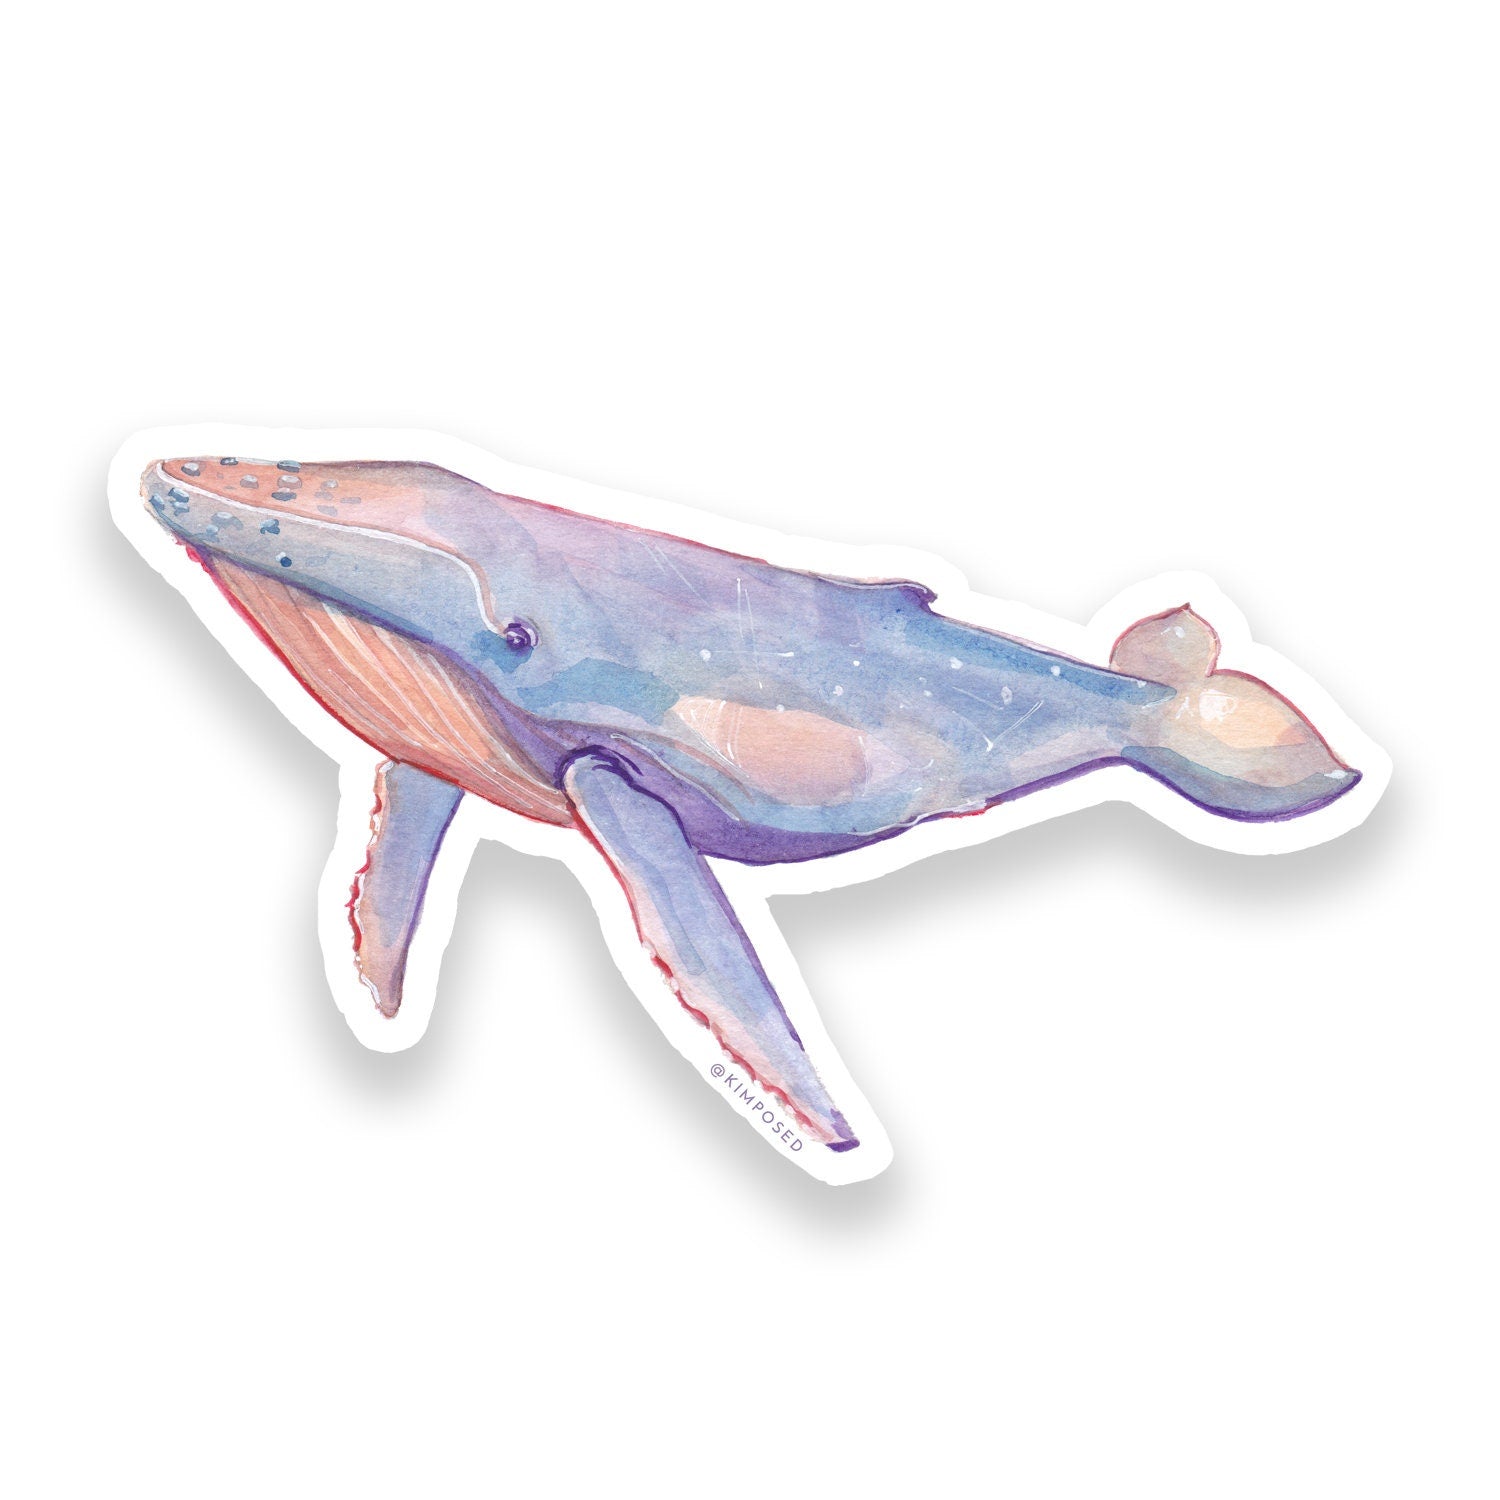 Watercolor Humpback Whale 3" Waterproof Vinyl Sticker for Water Bottles, Laptops, Phones & More **FREE USA SHIPPING**